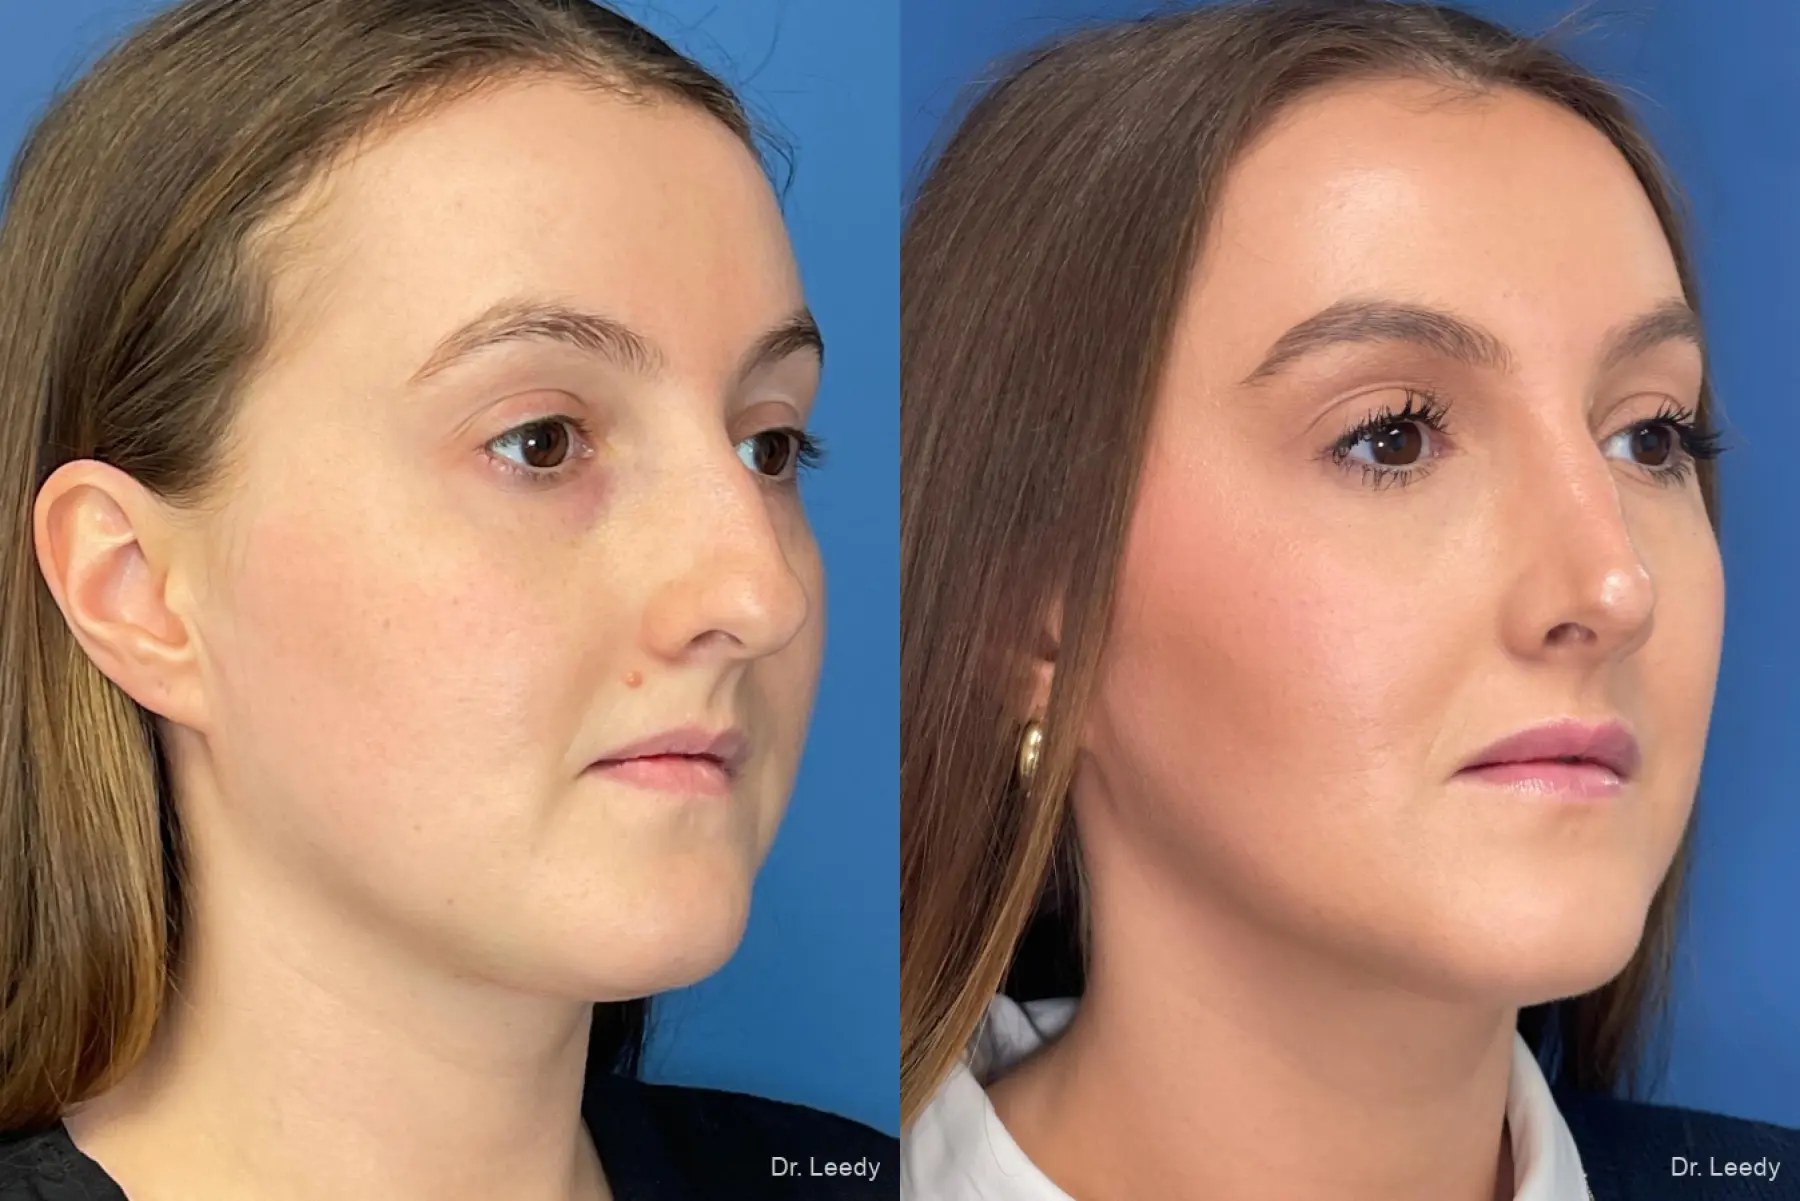 Rhinoplasty: Patient 1 - Before and After 2